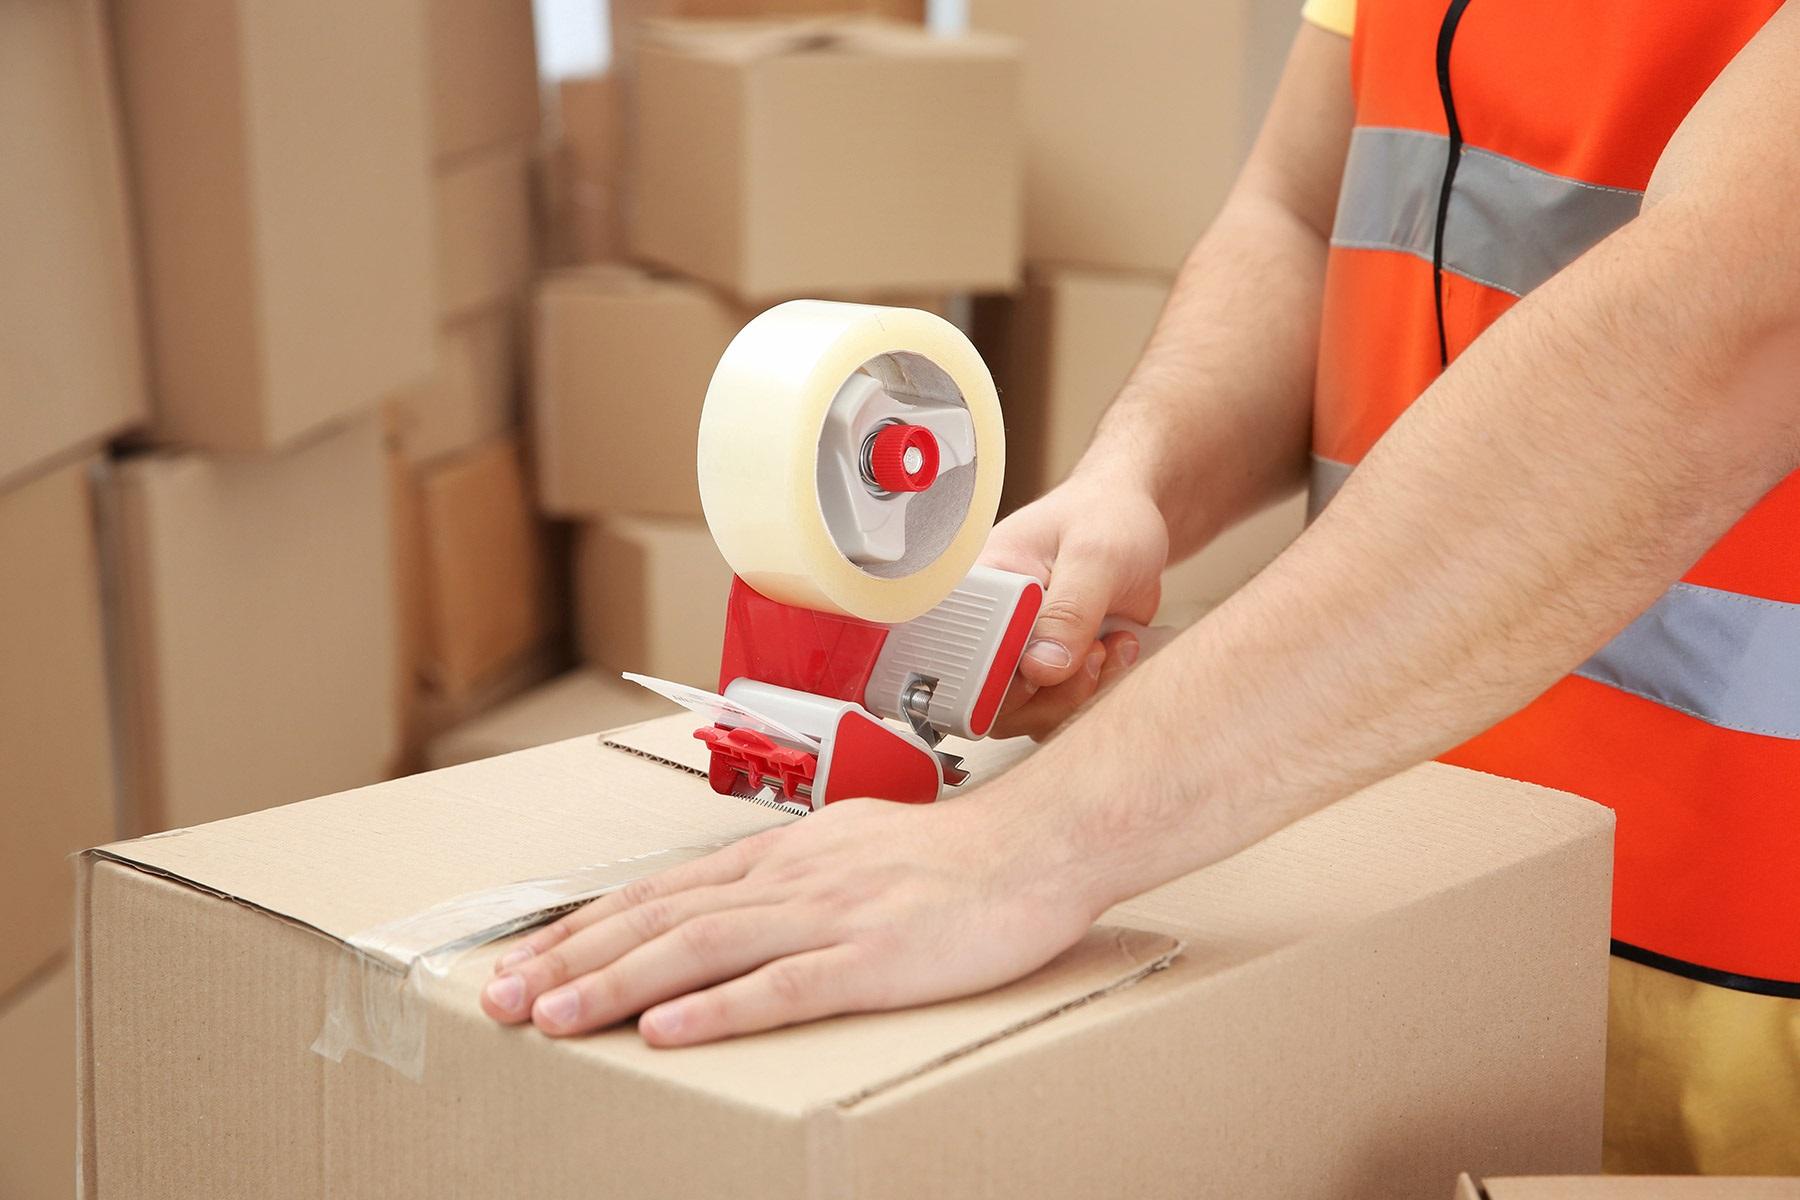 Safe Ship Moving Services Talks About Choosing the Right Moving Supplies: A Guide to Selecting and Using Right Packing Materials